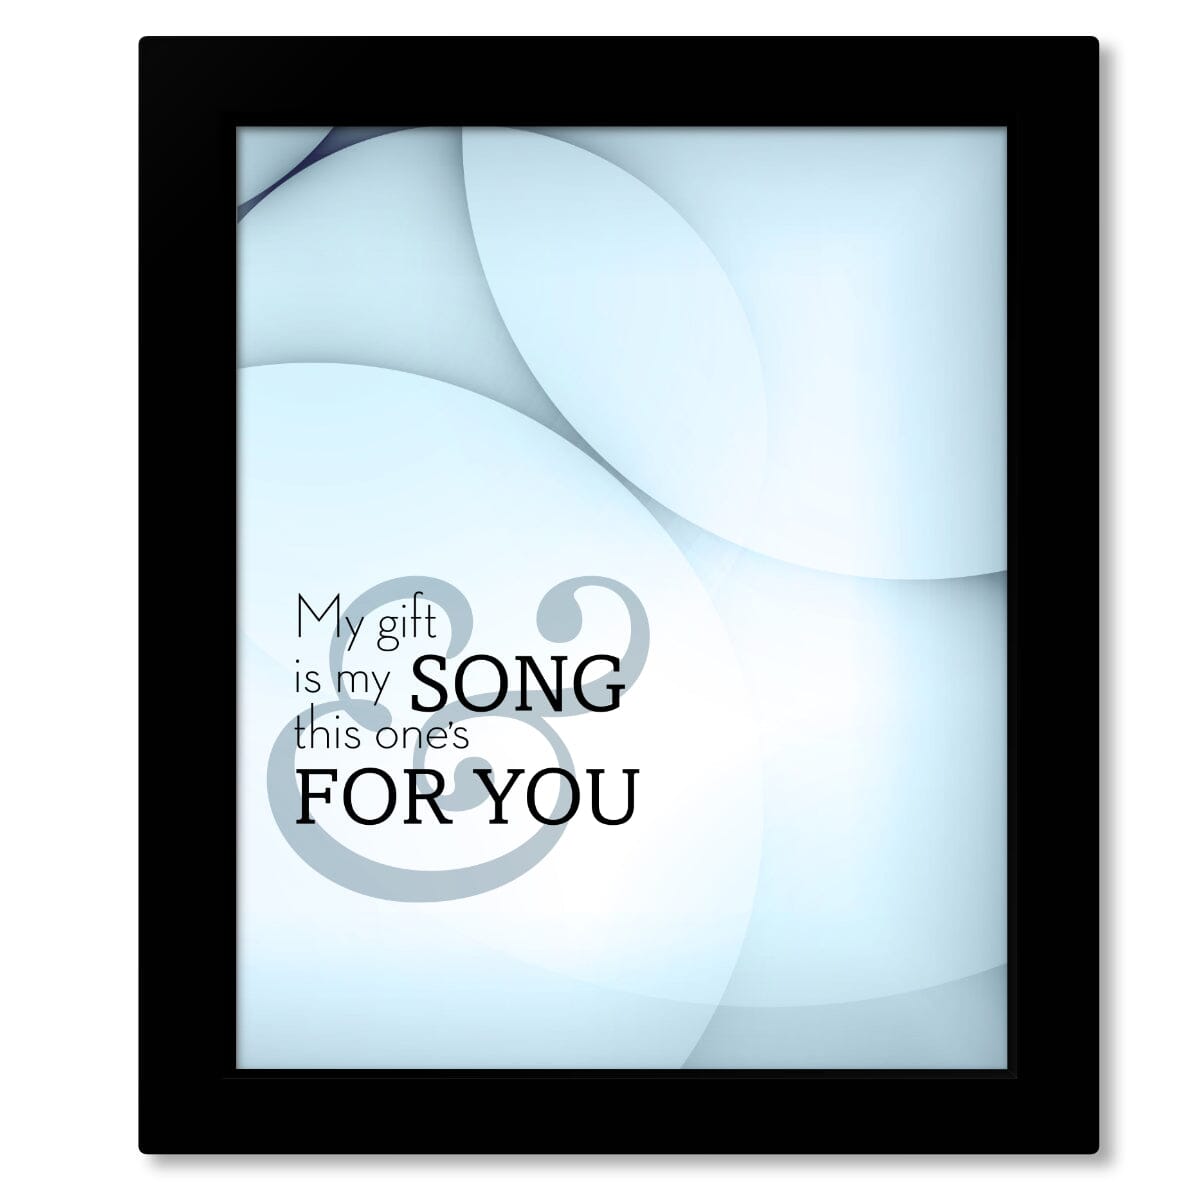 Your Song by Elton John - Lyric Poster Music Quote Print Song Lyrics Art Song Lyrics Art 8x10 Framed Print (without mat) 